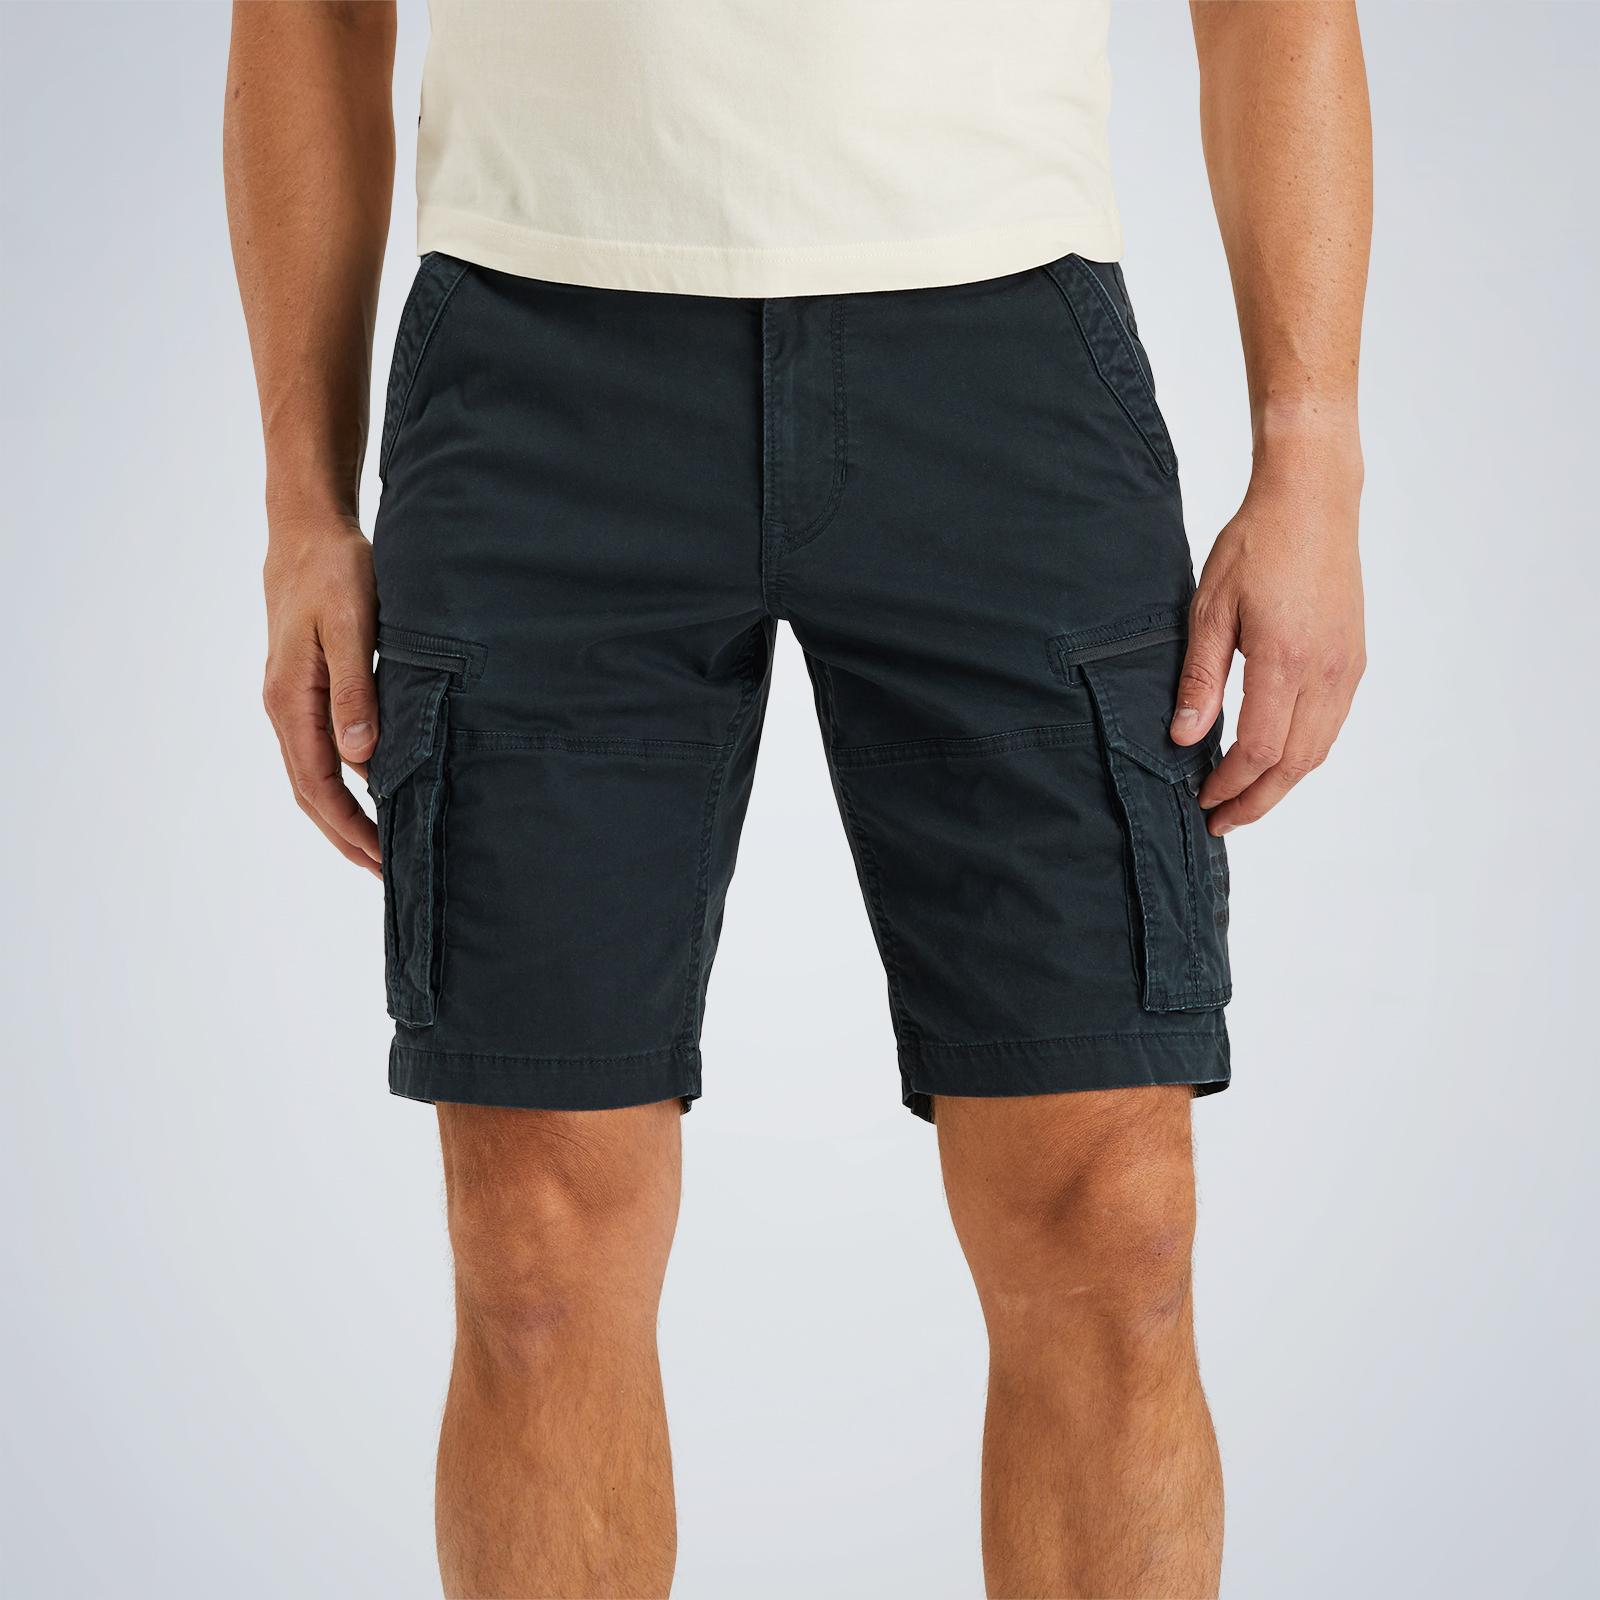 PME Legend Rotor relaxed fit shorts